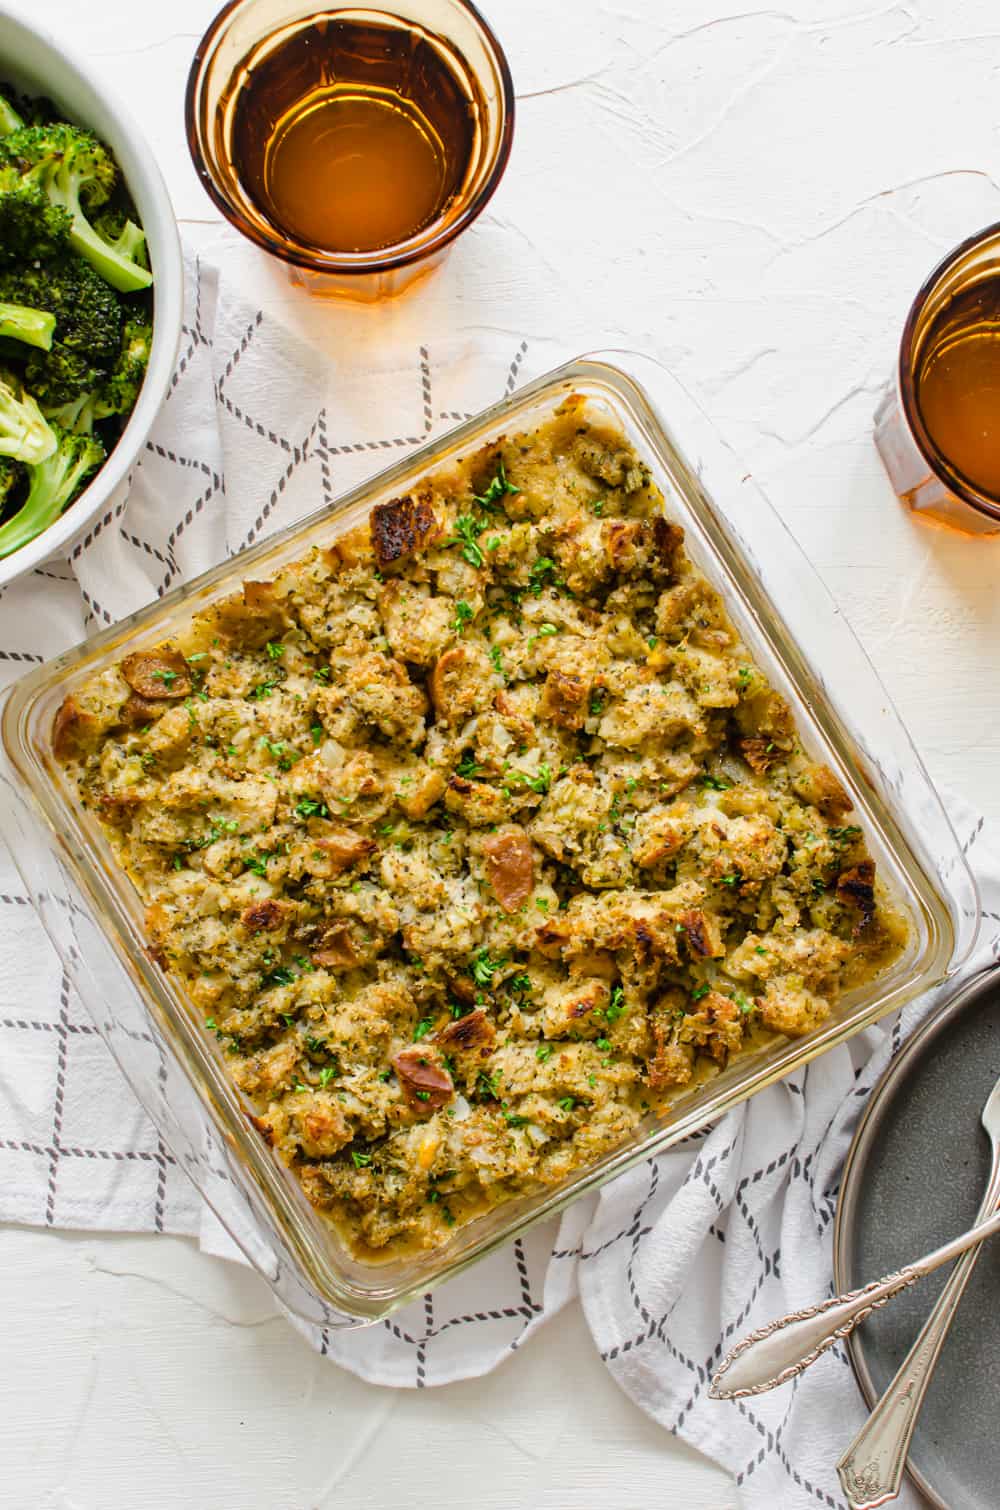 Turkey and stuffing casserole in a glass baking pan ready to serve.